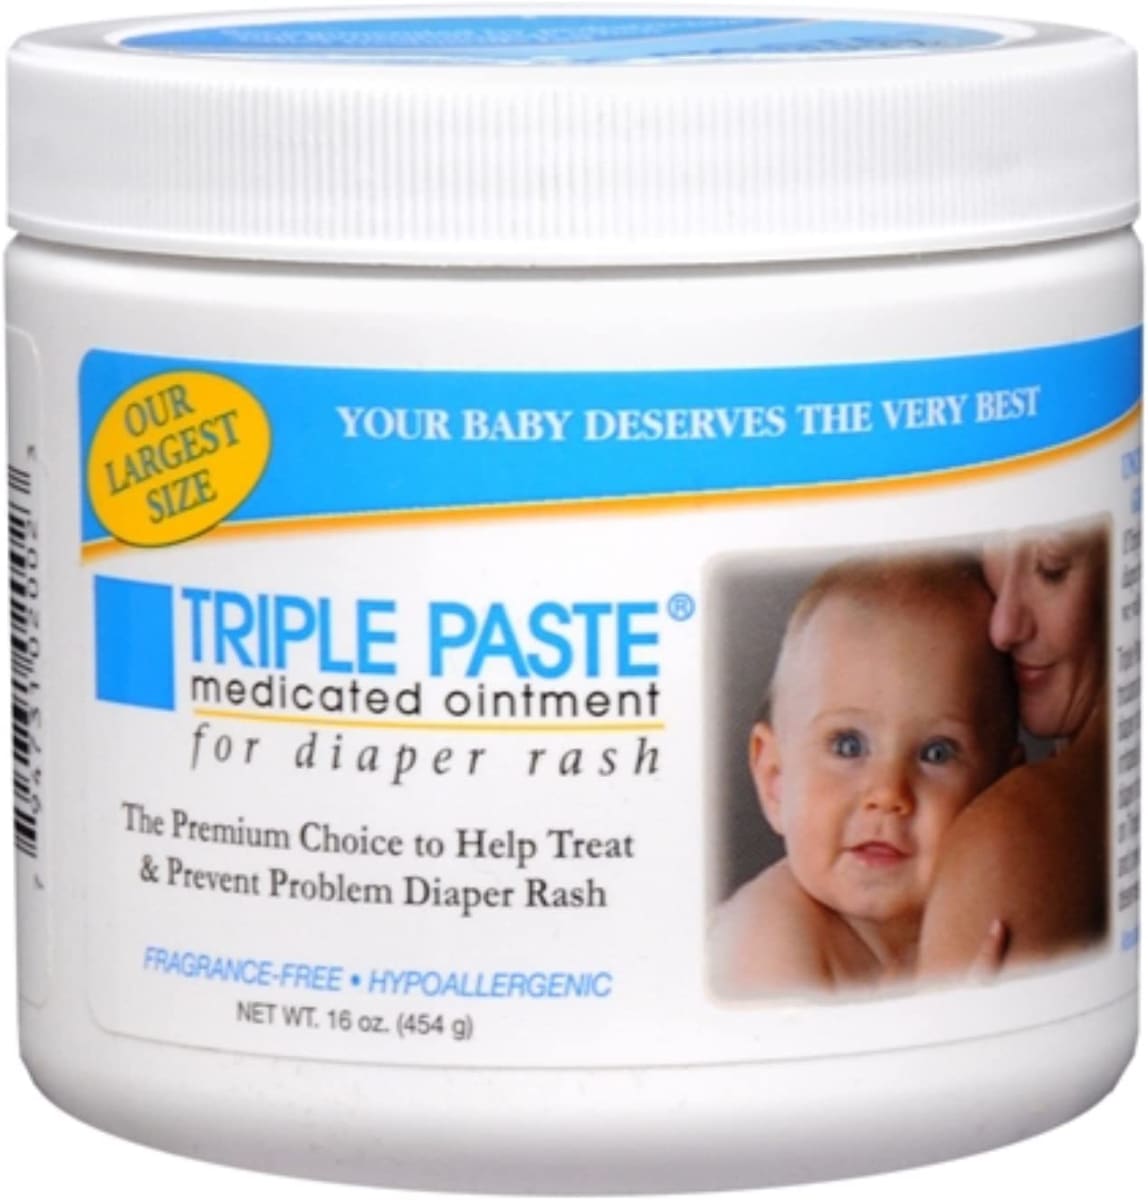 Diaper Rash Cream, Hypoallergenic Medicated Ointment for Babies